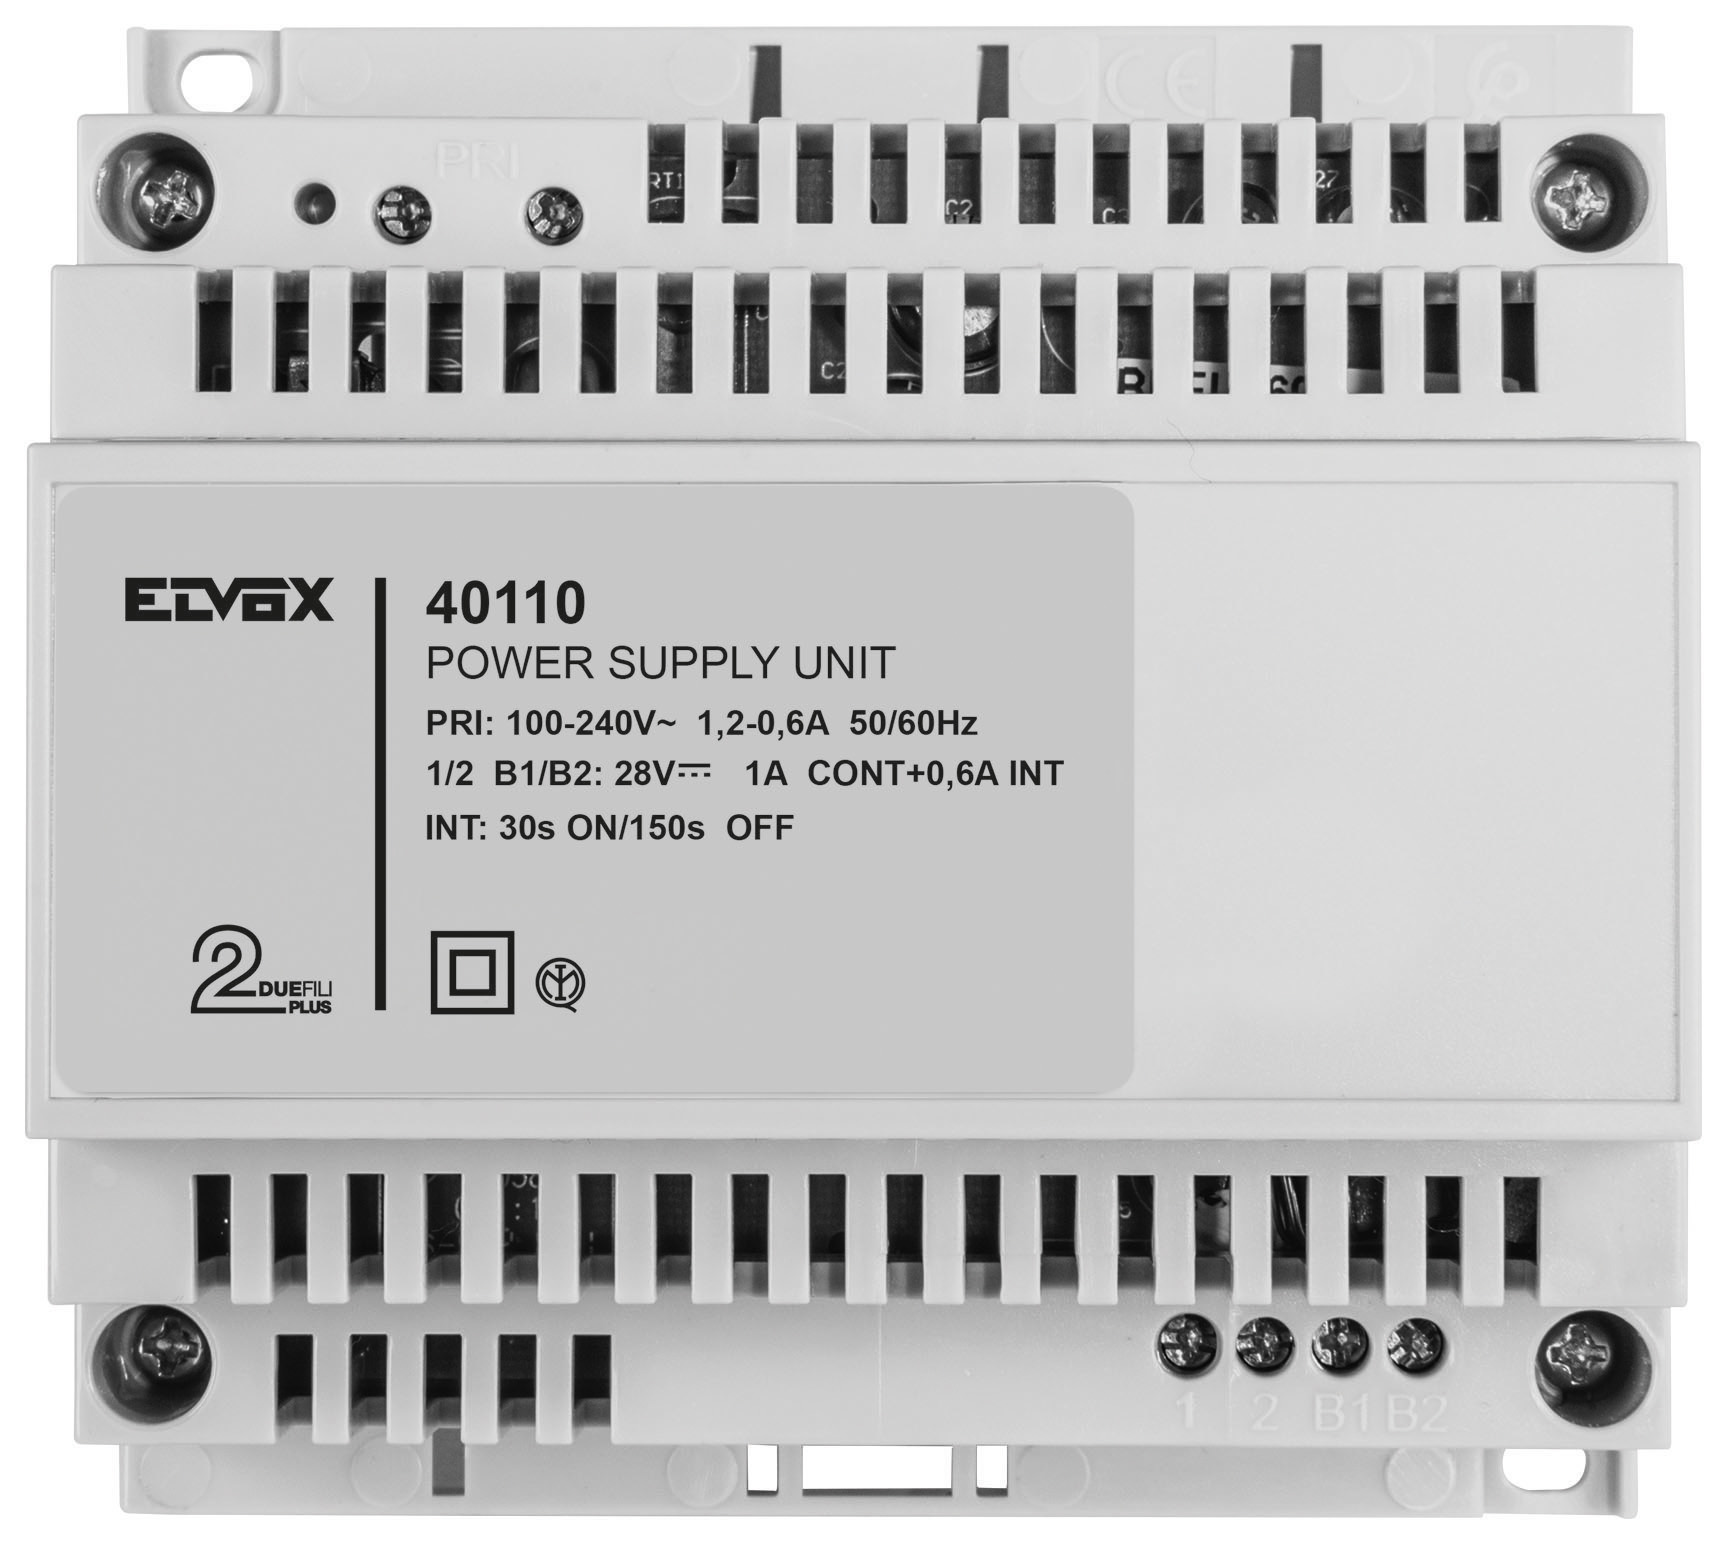 ELVOX 28VDC 100-240VDC POWER SUPPLY 1.6A 1.2A 2x OUTPUT TERM STRIP OUTPUT DIN RAIL MOUNTED BEIGE